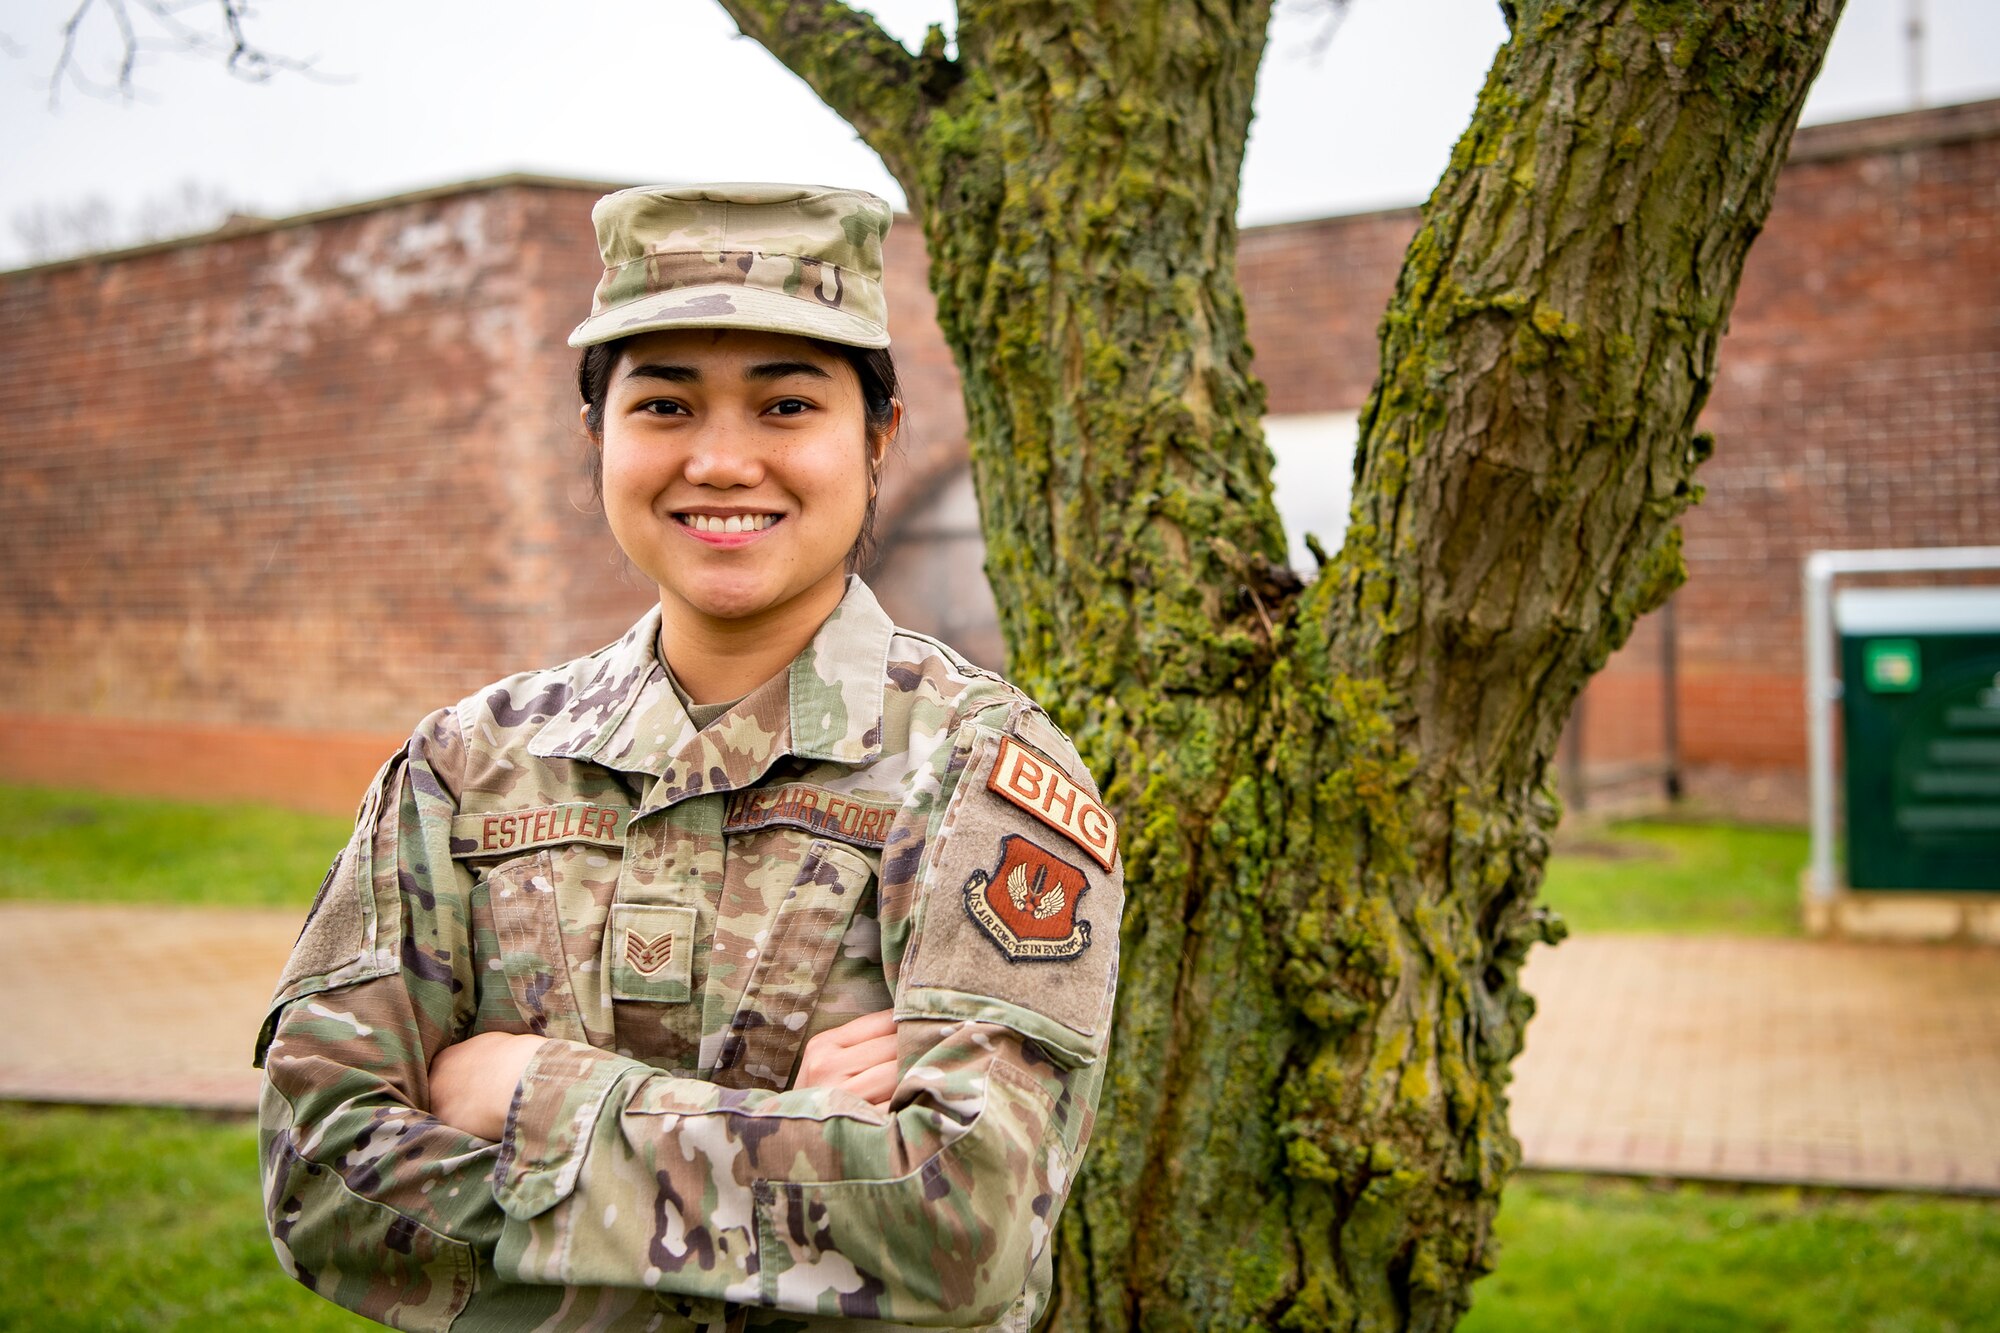 U.S. Air Force Staff Sgt. Bloom Marie Esteller, 423d Air Base Group NCO in Charge Honor Guard, poses for a photo at RAF Alconbury, England, March 7, 2023. This photo is part of a project to highlight female Airmen from across the wing in honor of Women's History Month. (U.S. Air Force phot by Staff Sgt. Eugene Oliver)